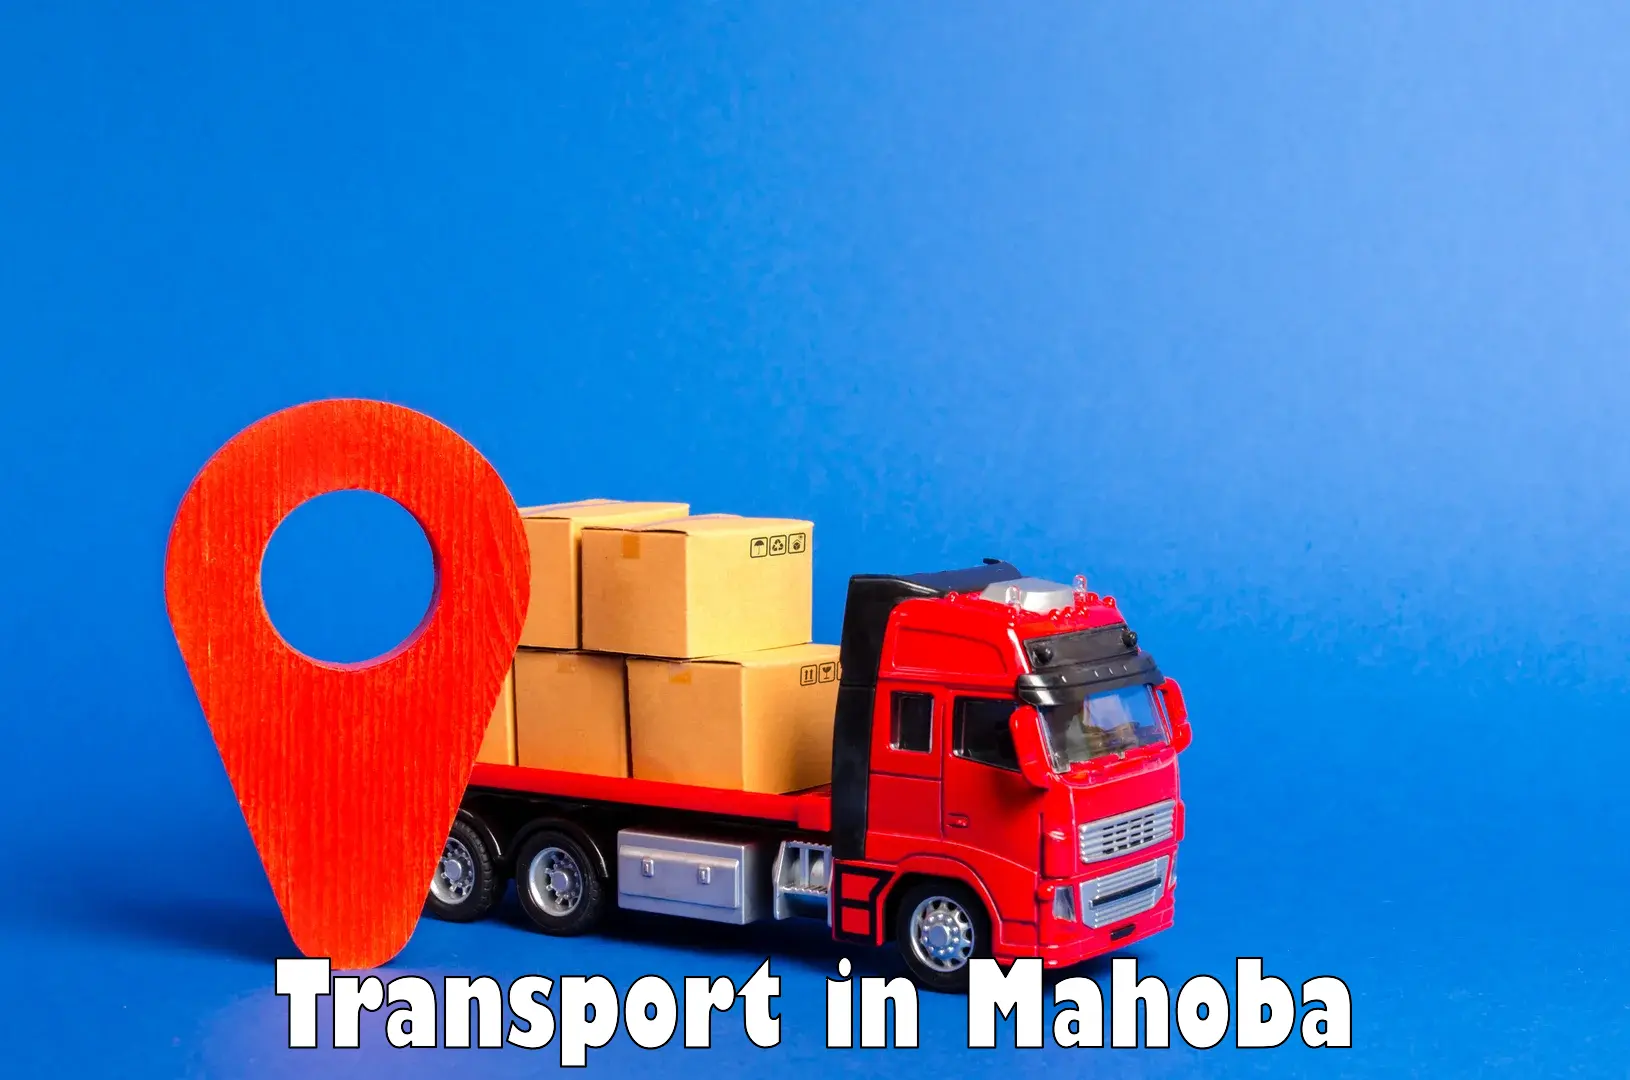 Transport shared services in Mahoba